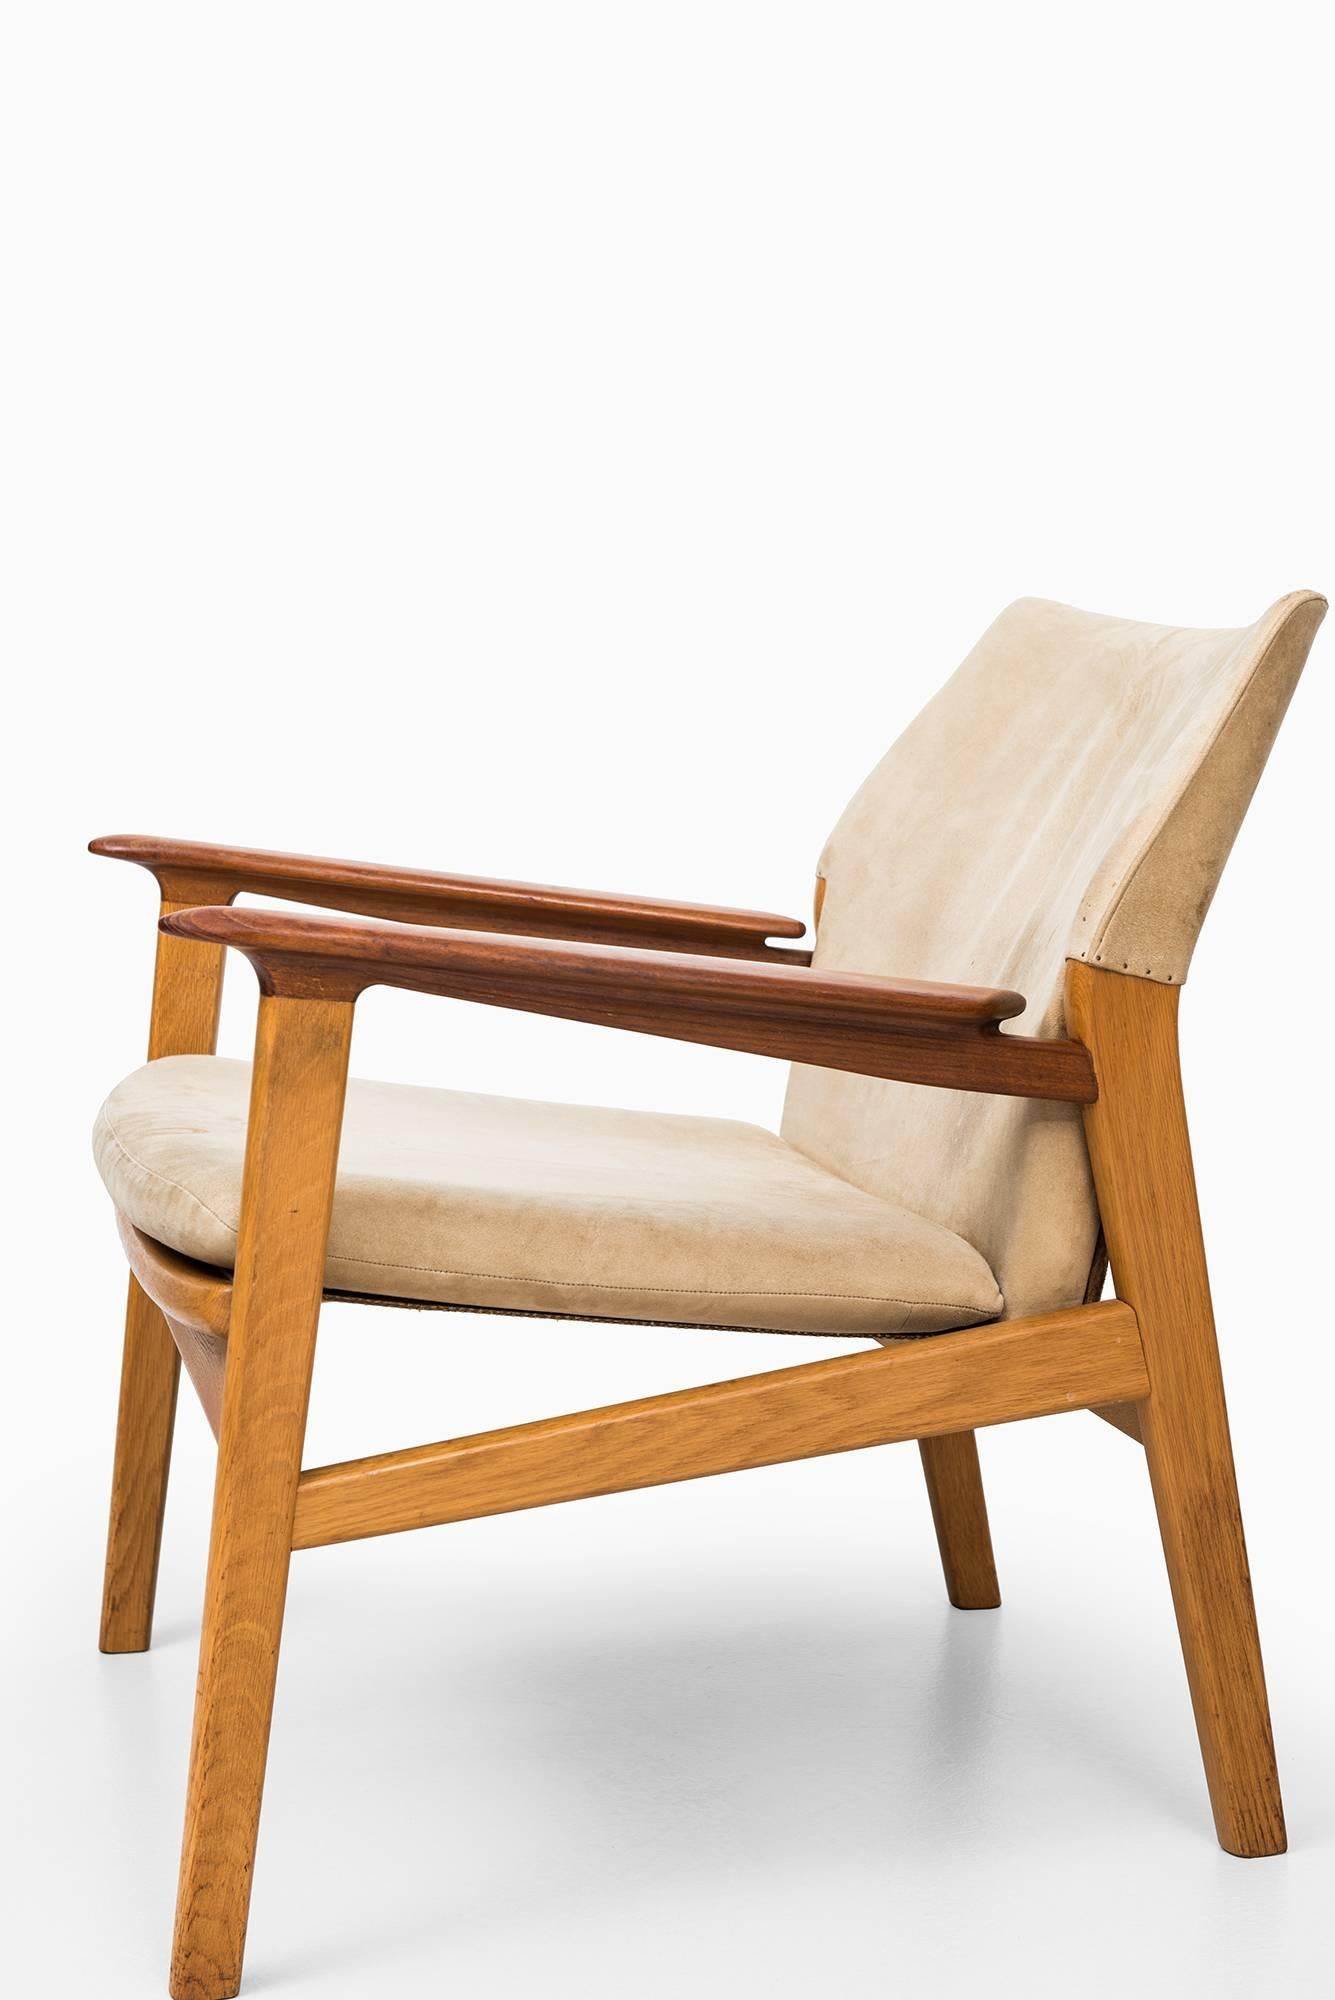 Mid-20th Century Hans Olsen Easy Chairs Model 9015 by Gärsnäs in Sweden For Sale